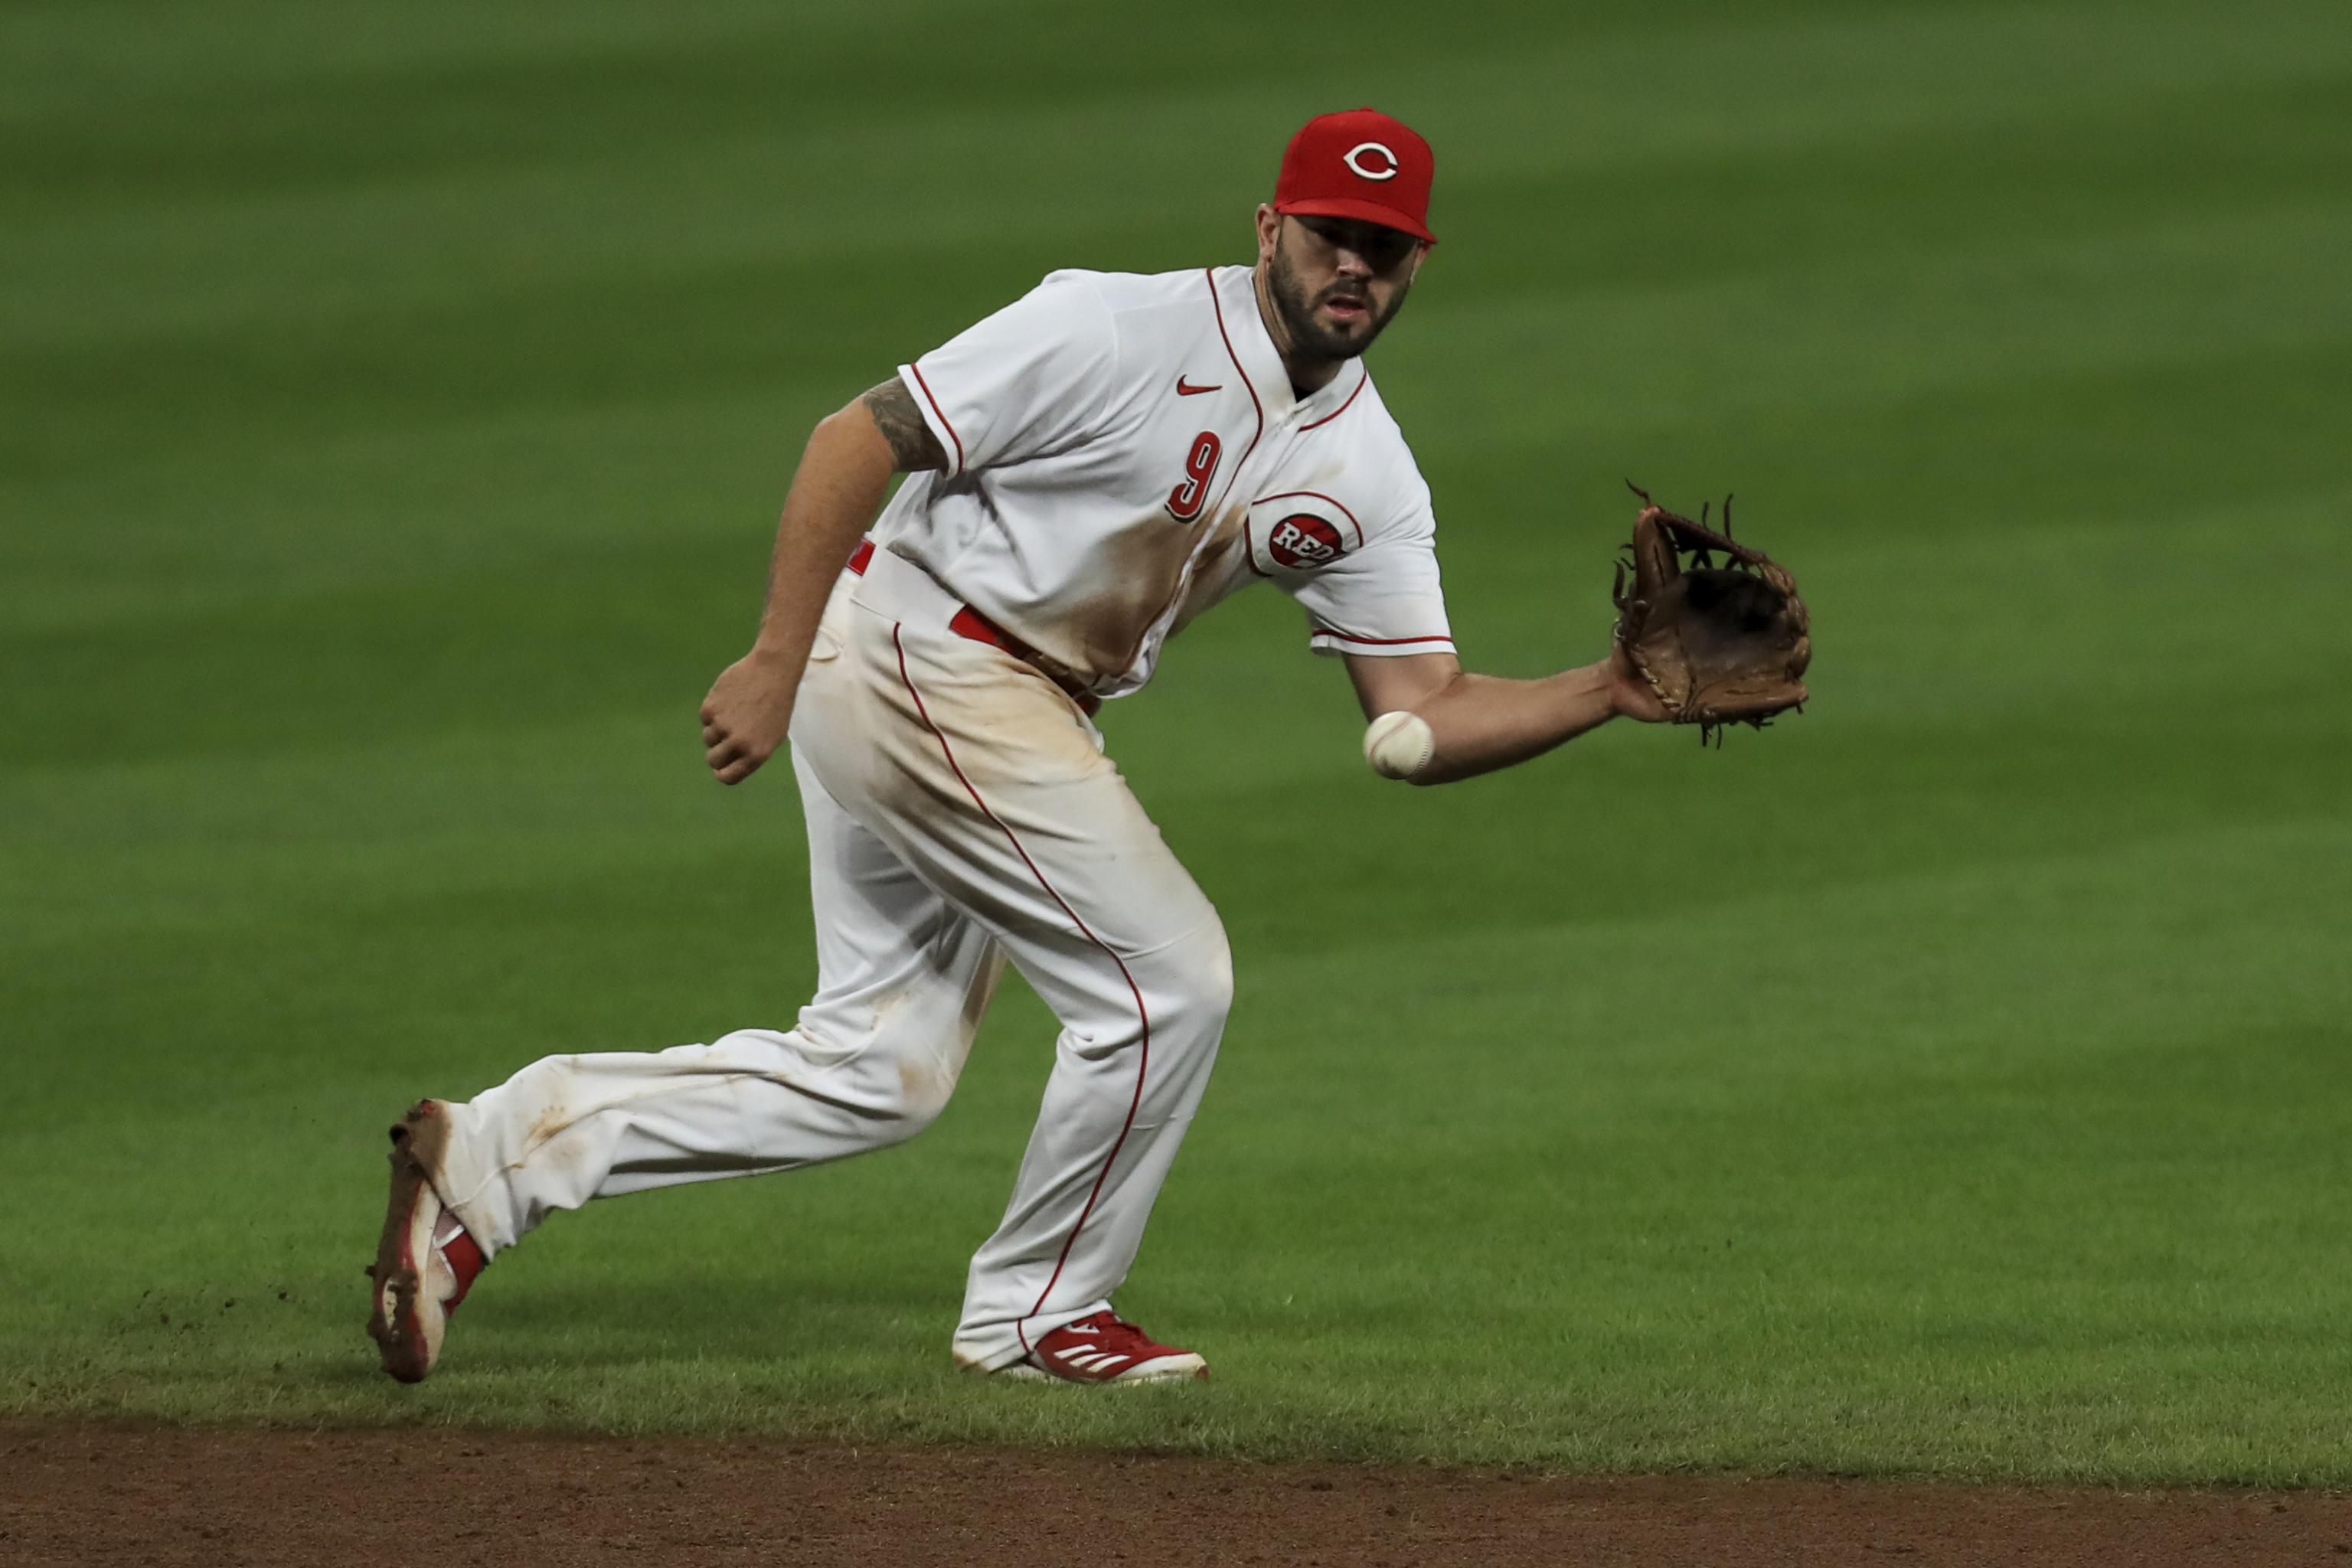 Report: Reds sign third baseman Mike Moustakas to four-year deal